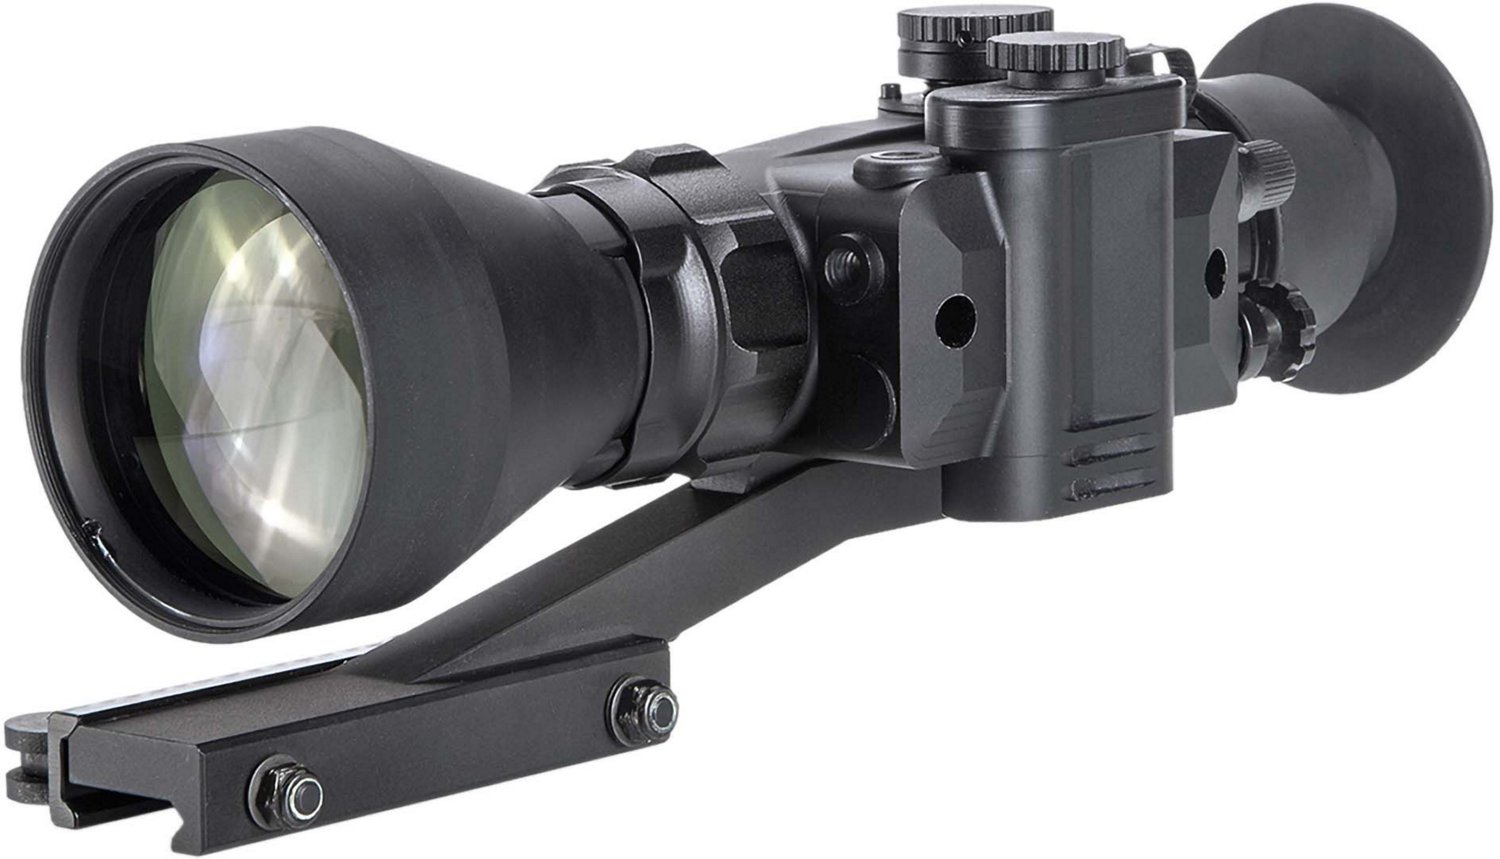 Agm Global Vision Wolverine Pro 4 Nl1 4 X 70 Riflescope Academy